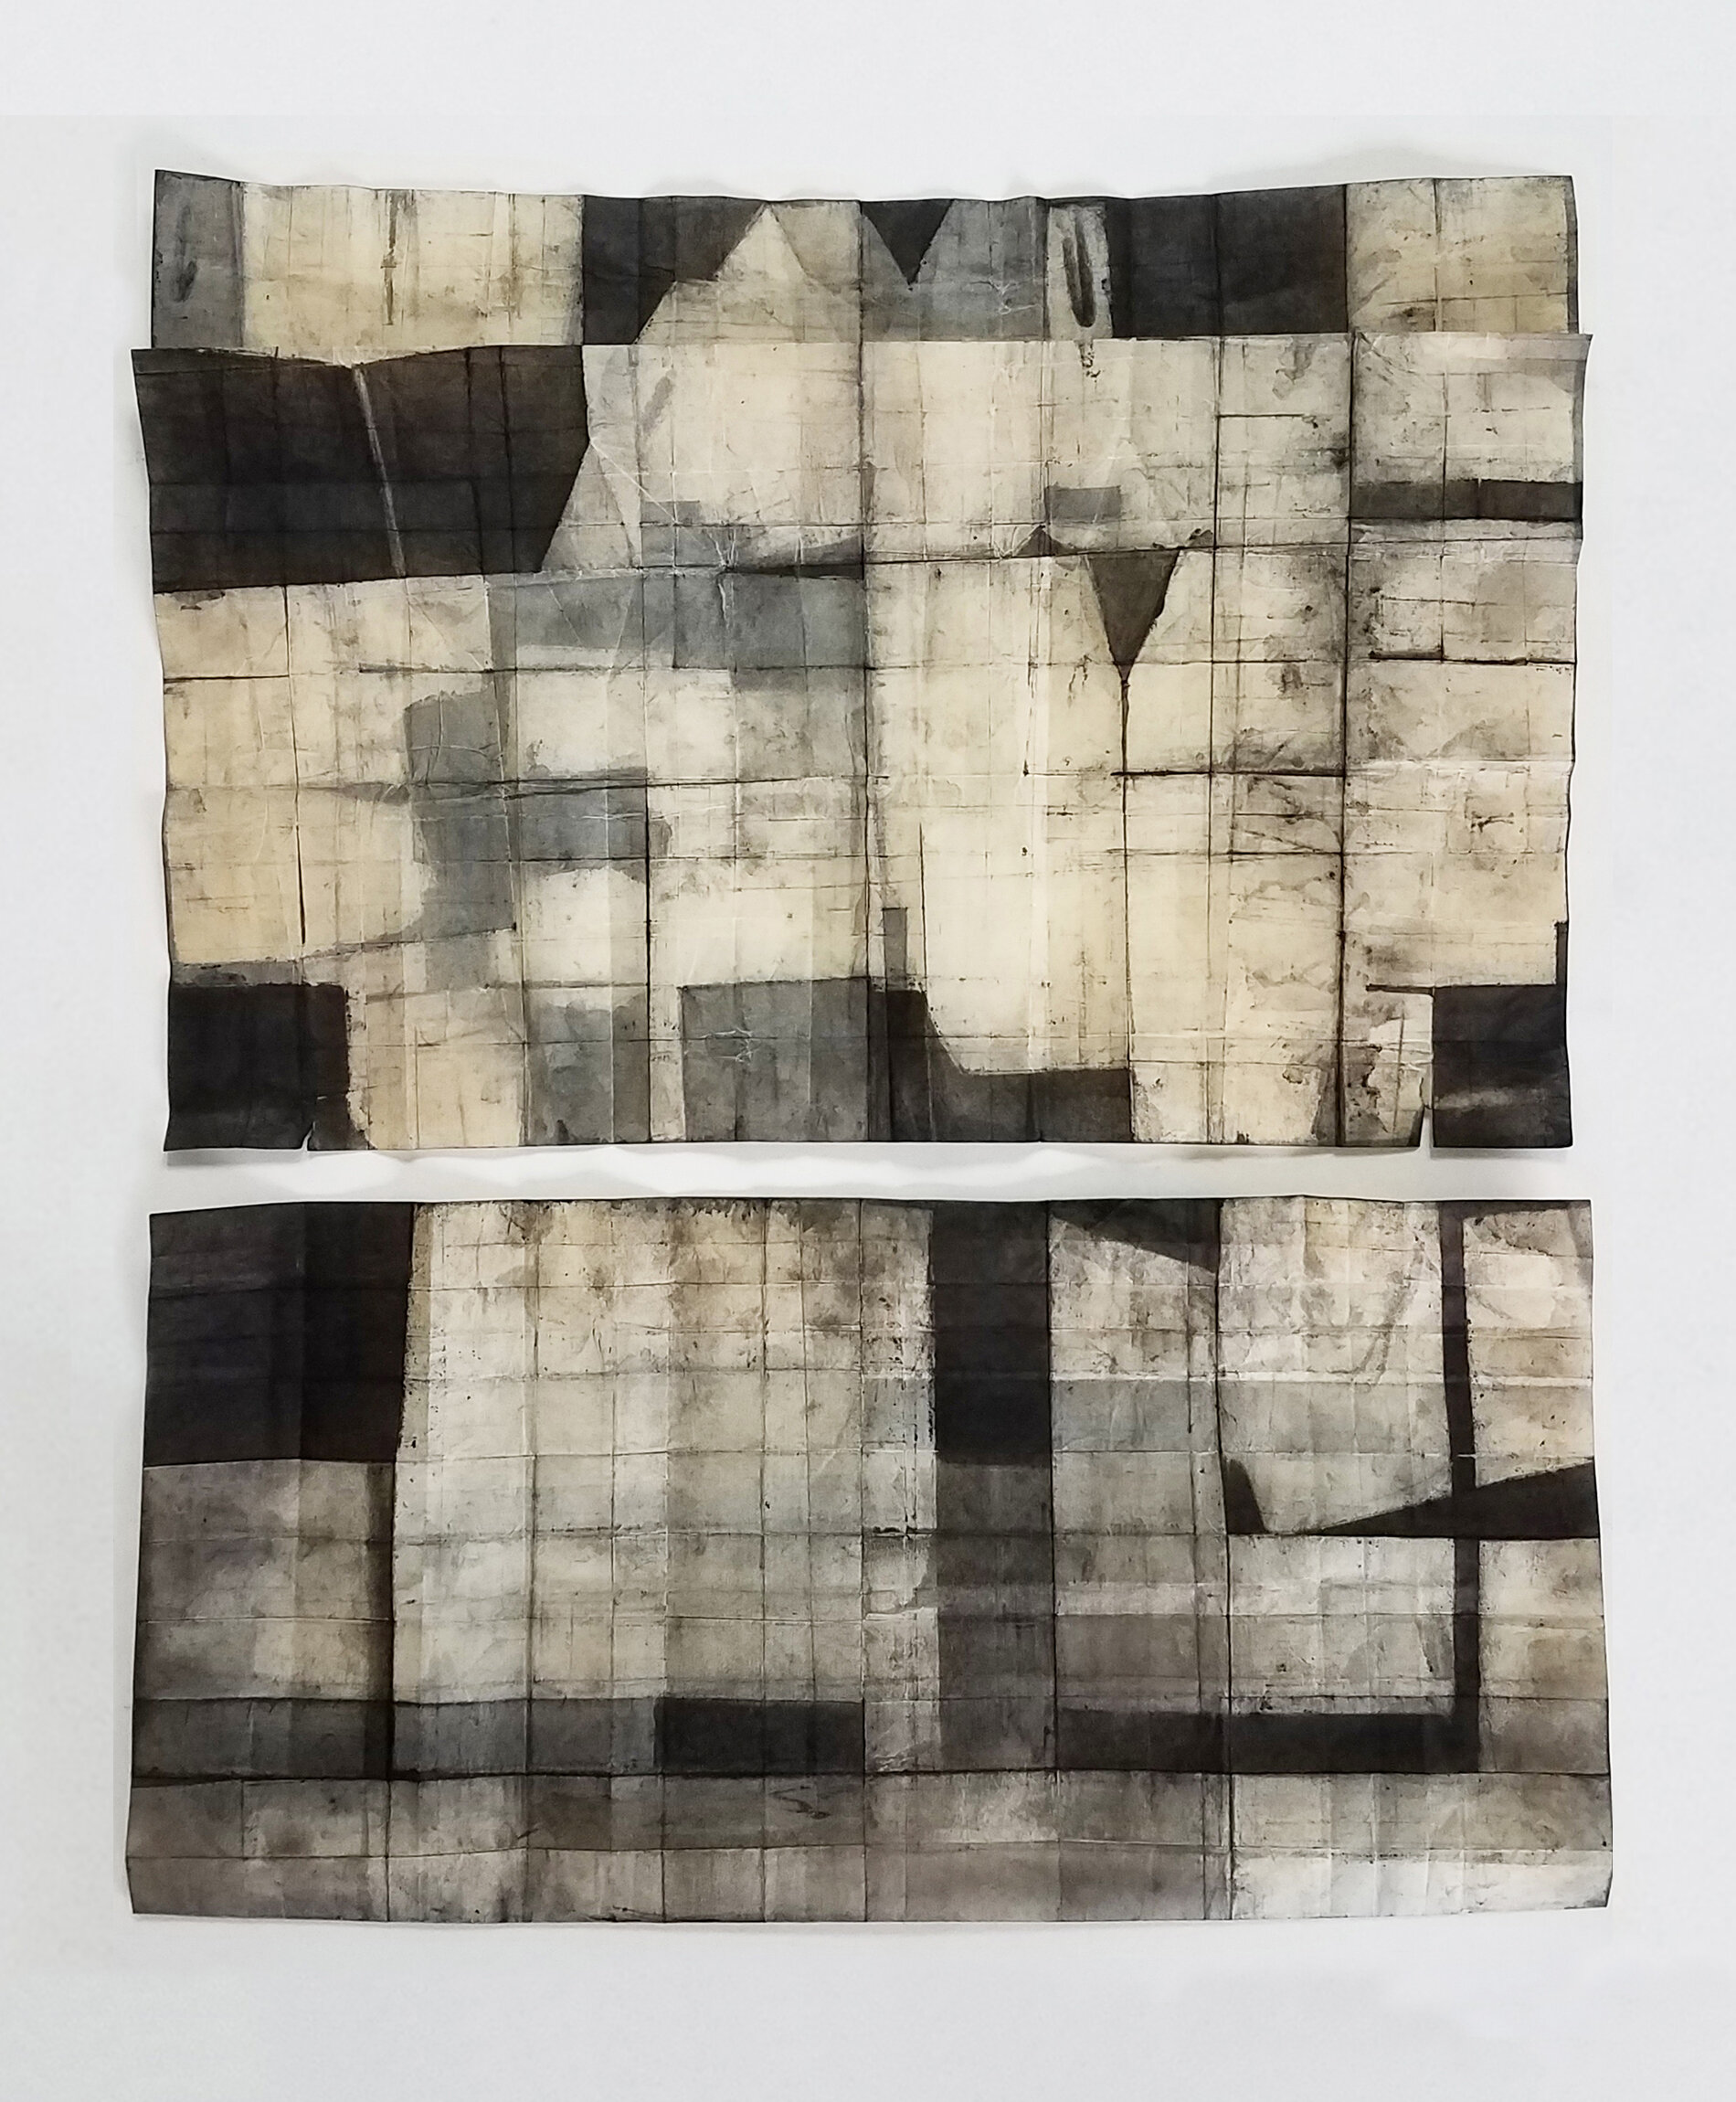  FD 21_02, 2021, charcoal and mineral oil on paper, 18 x 15 inches 